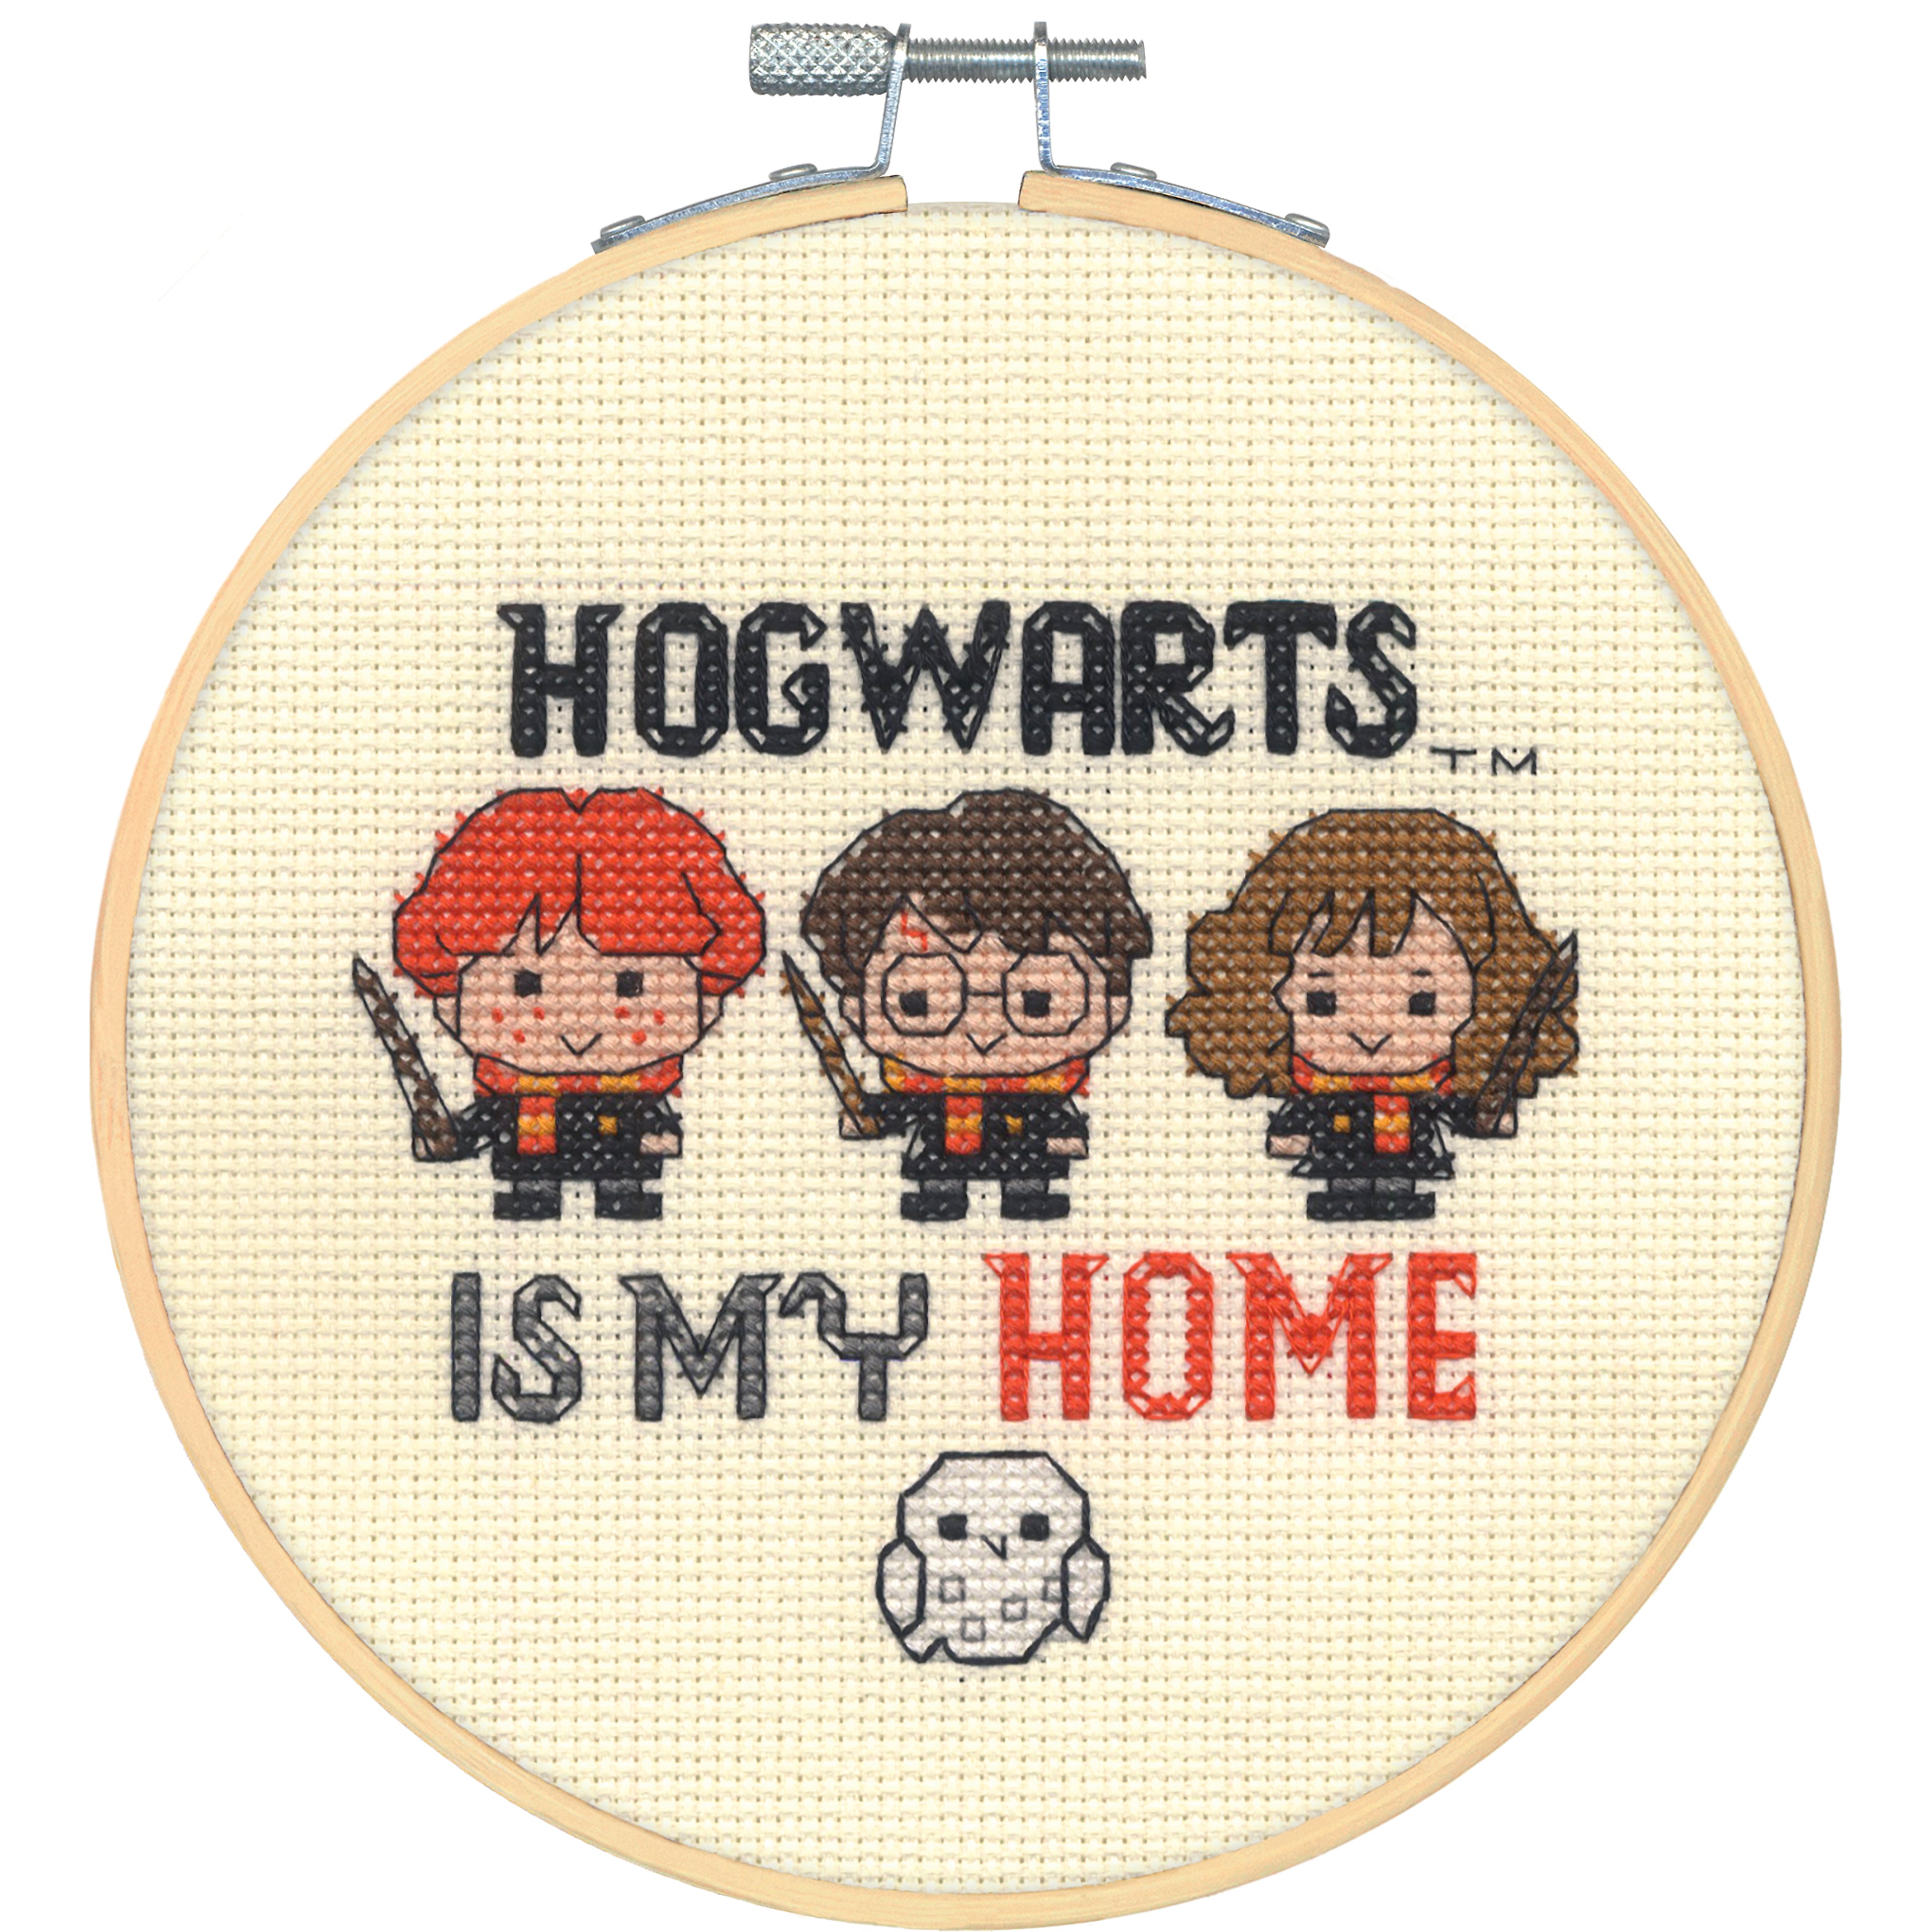 Ron Weasley Harry Potter Cross Stitch Kits Needlework Counted Kits  Embroidery Craft Cross-stitch DIY Home Dumbledore Hermione Snape Malfoy 